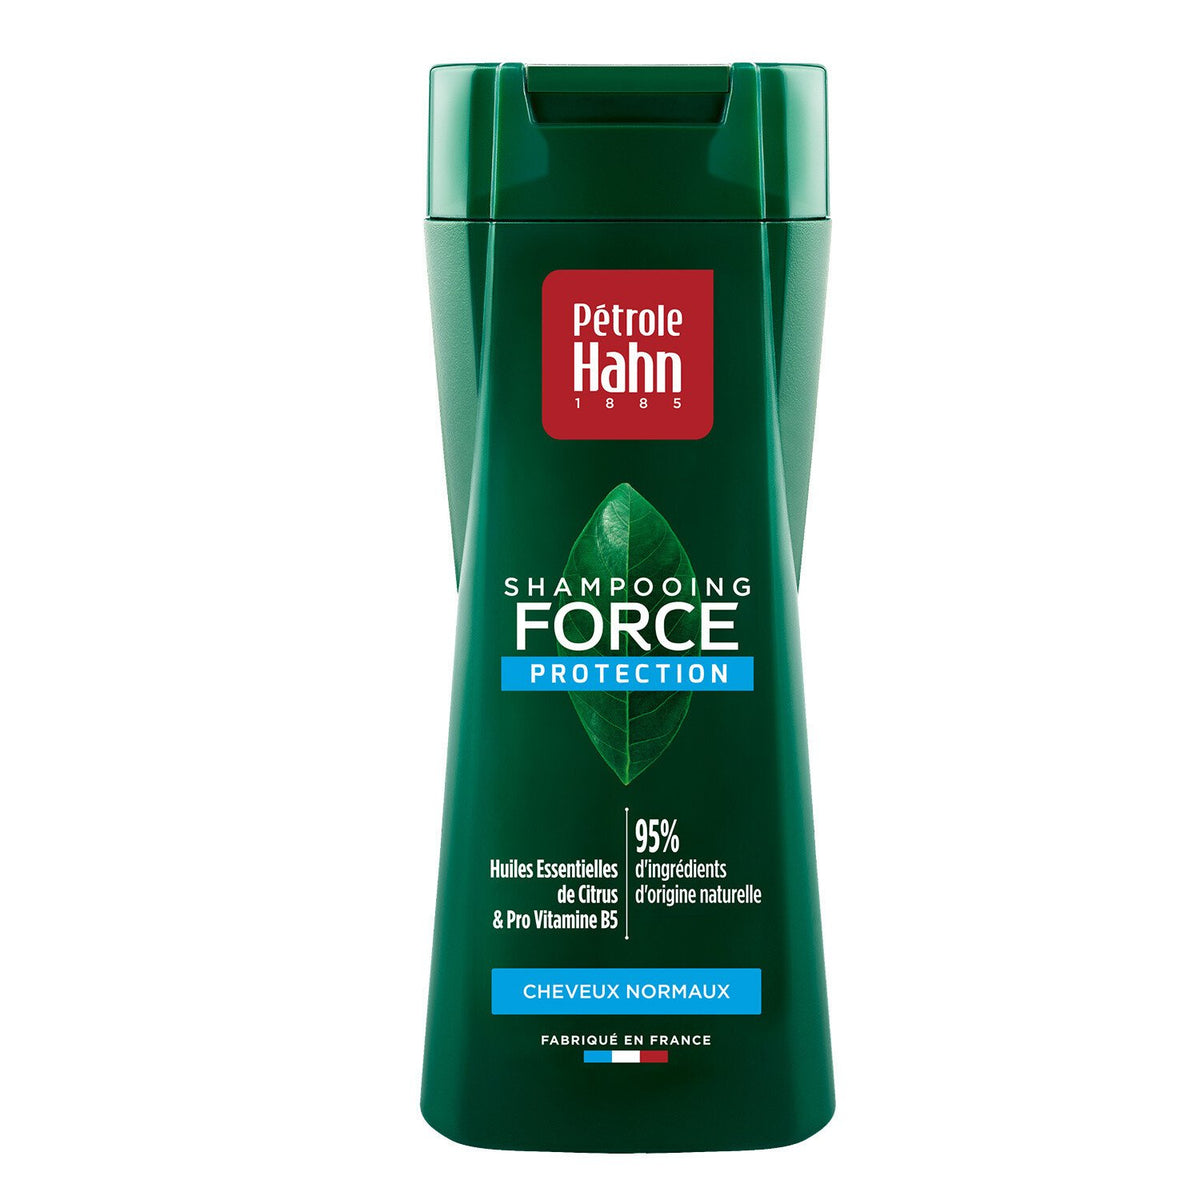 PETROLE HAHN Shampooing force protection 250 ml J111